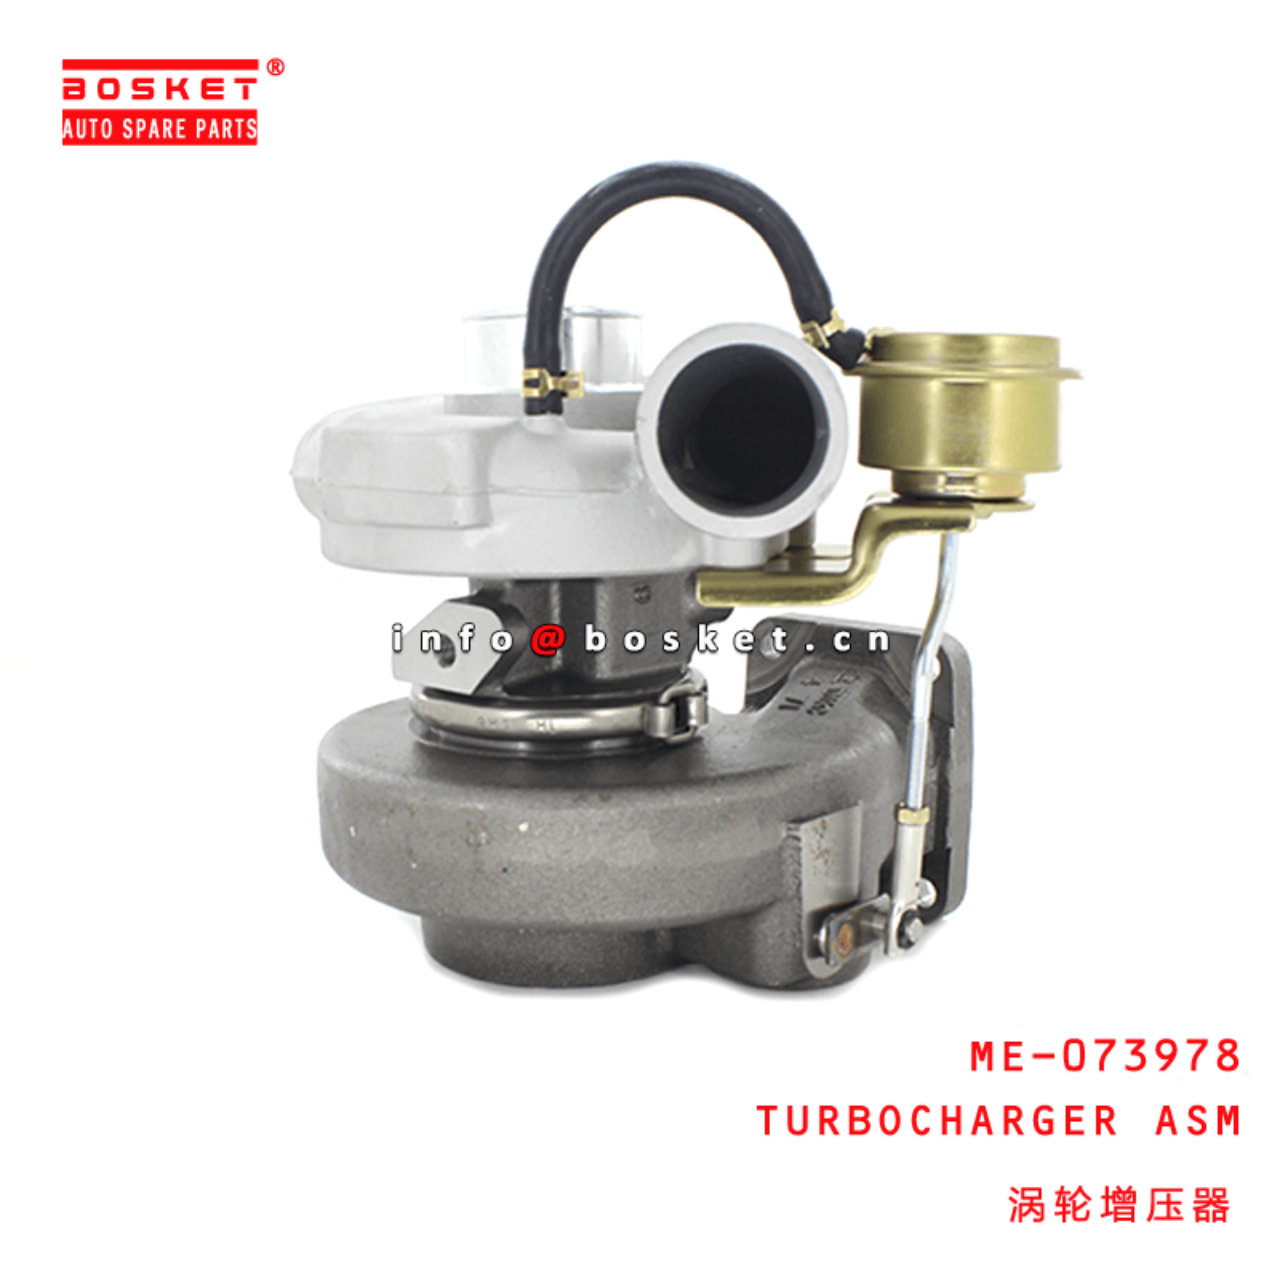  ME-073978 Turbocharger Assembly Suitable For MITSUBISHI FUSO 